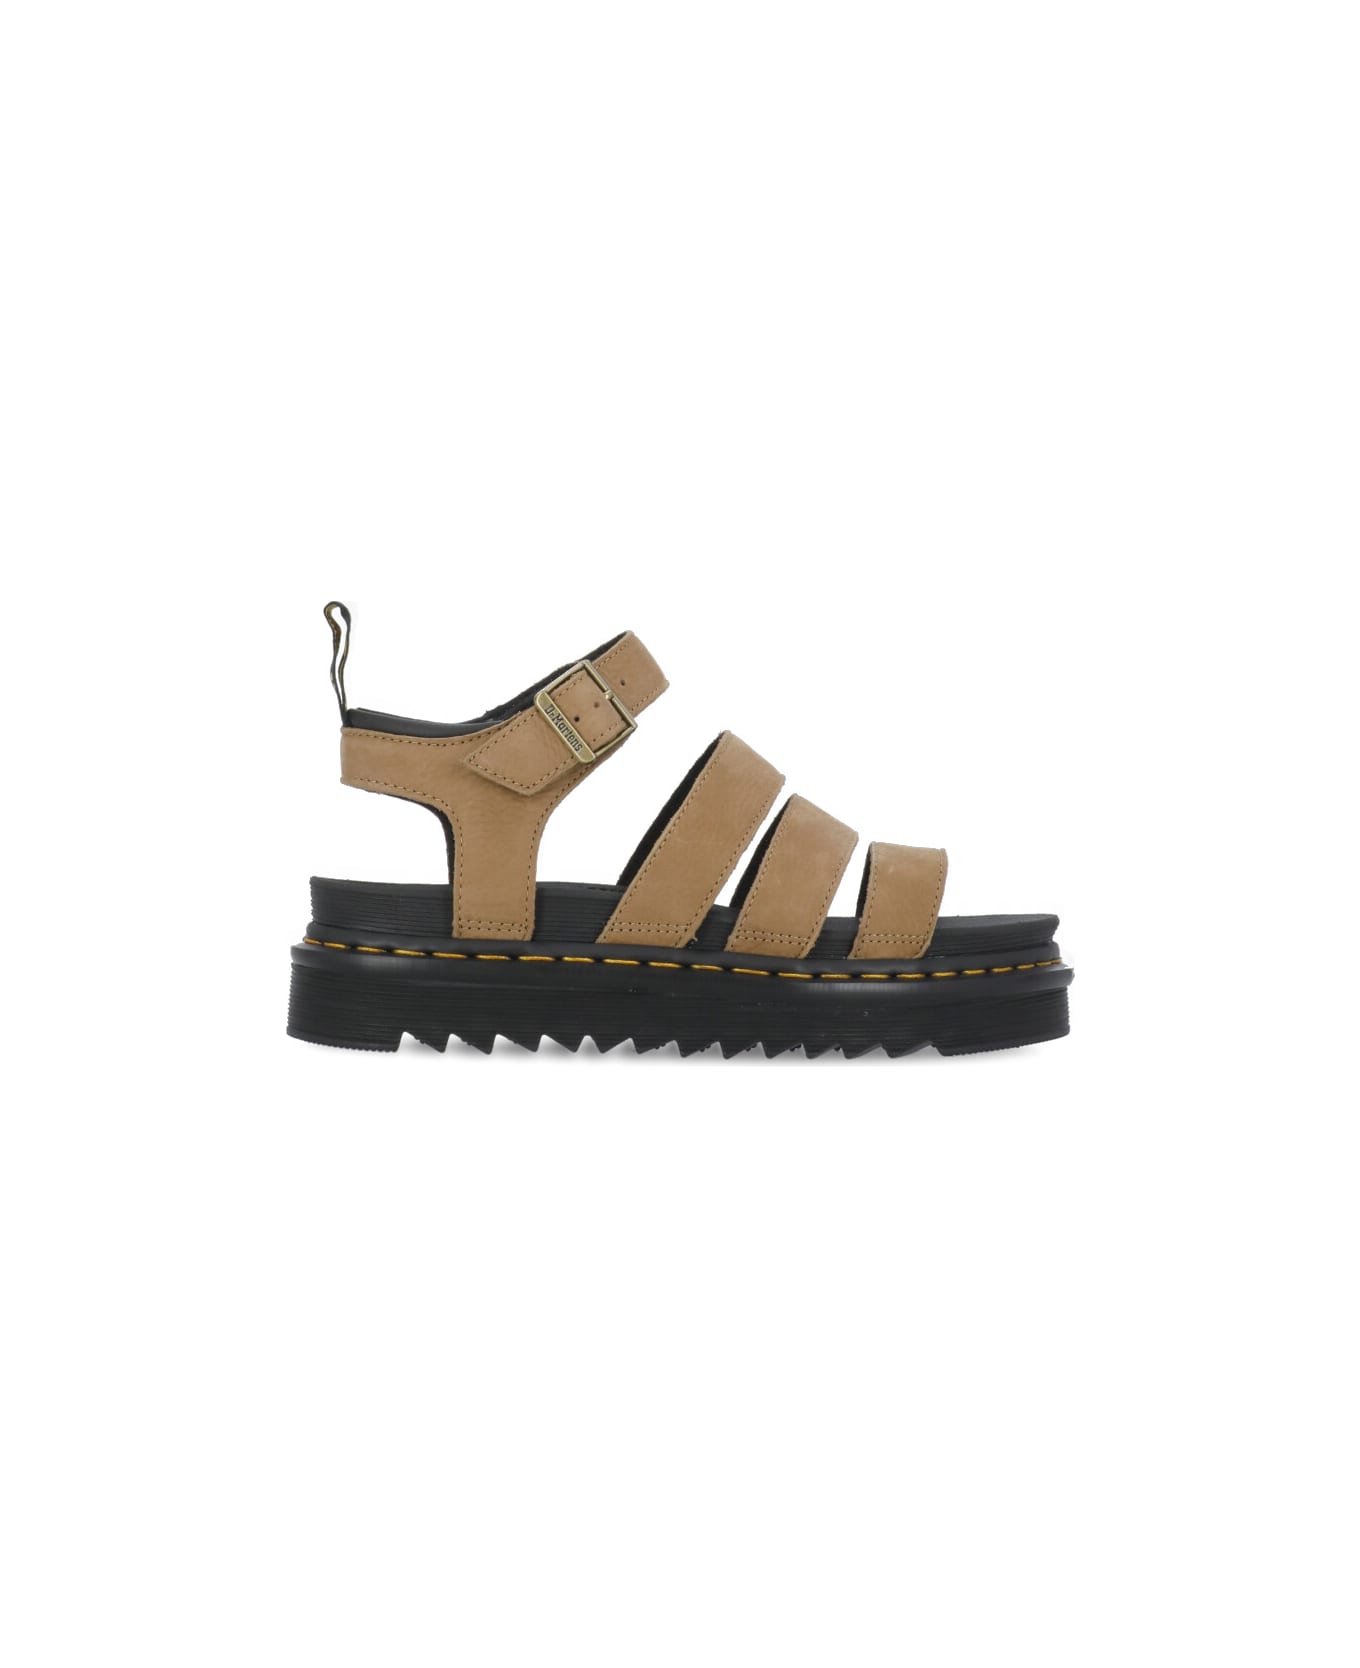 Dr. Martens Blaire Sandals - Brown サンダル